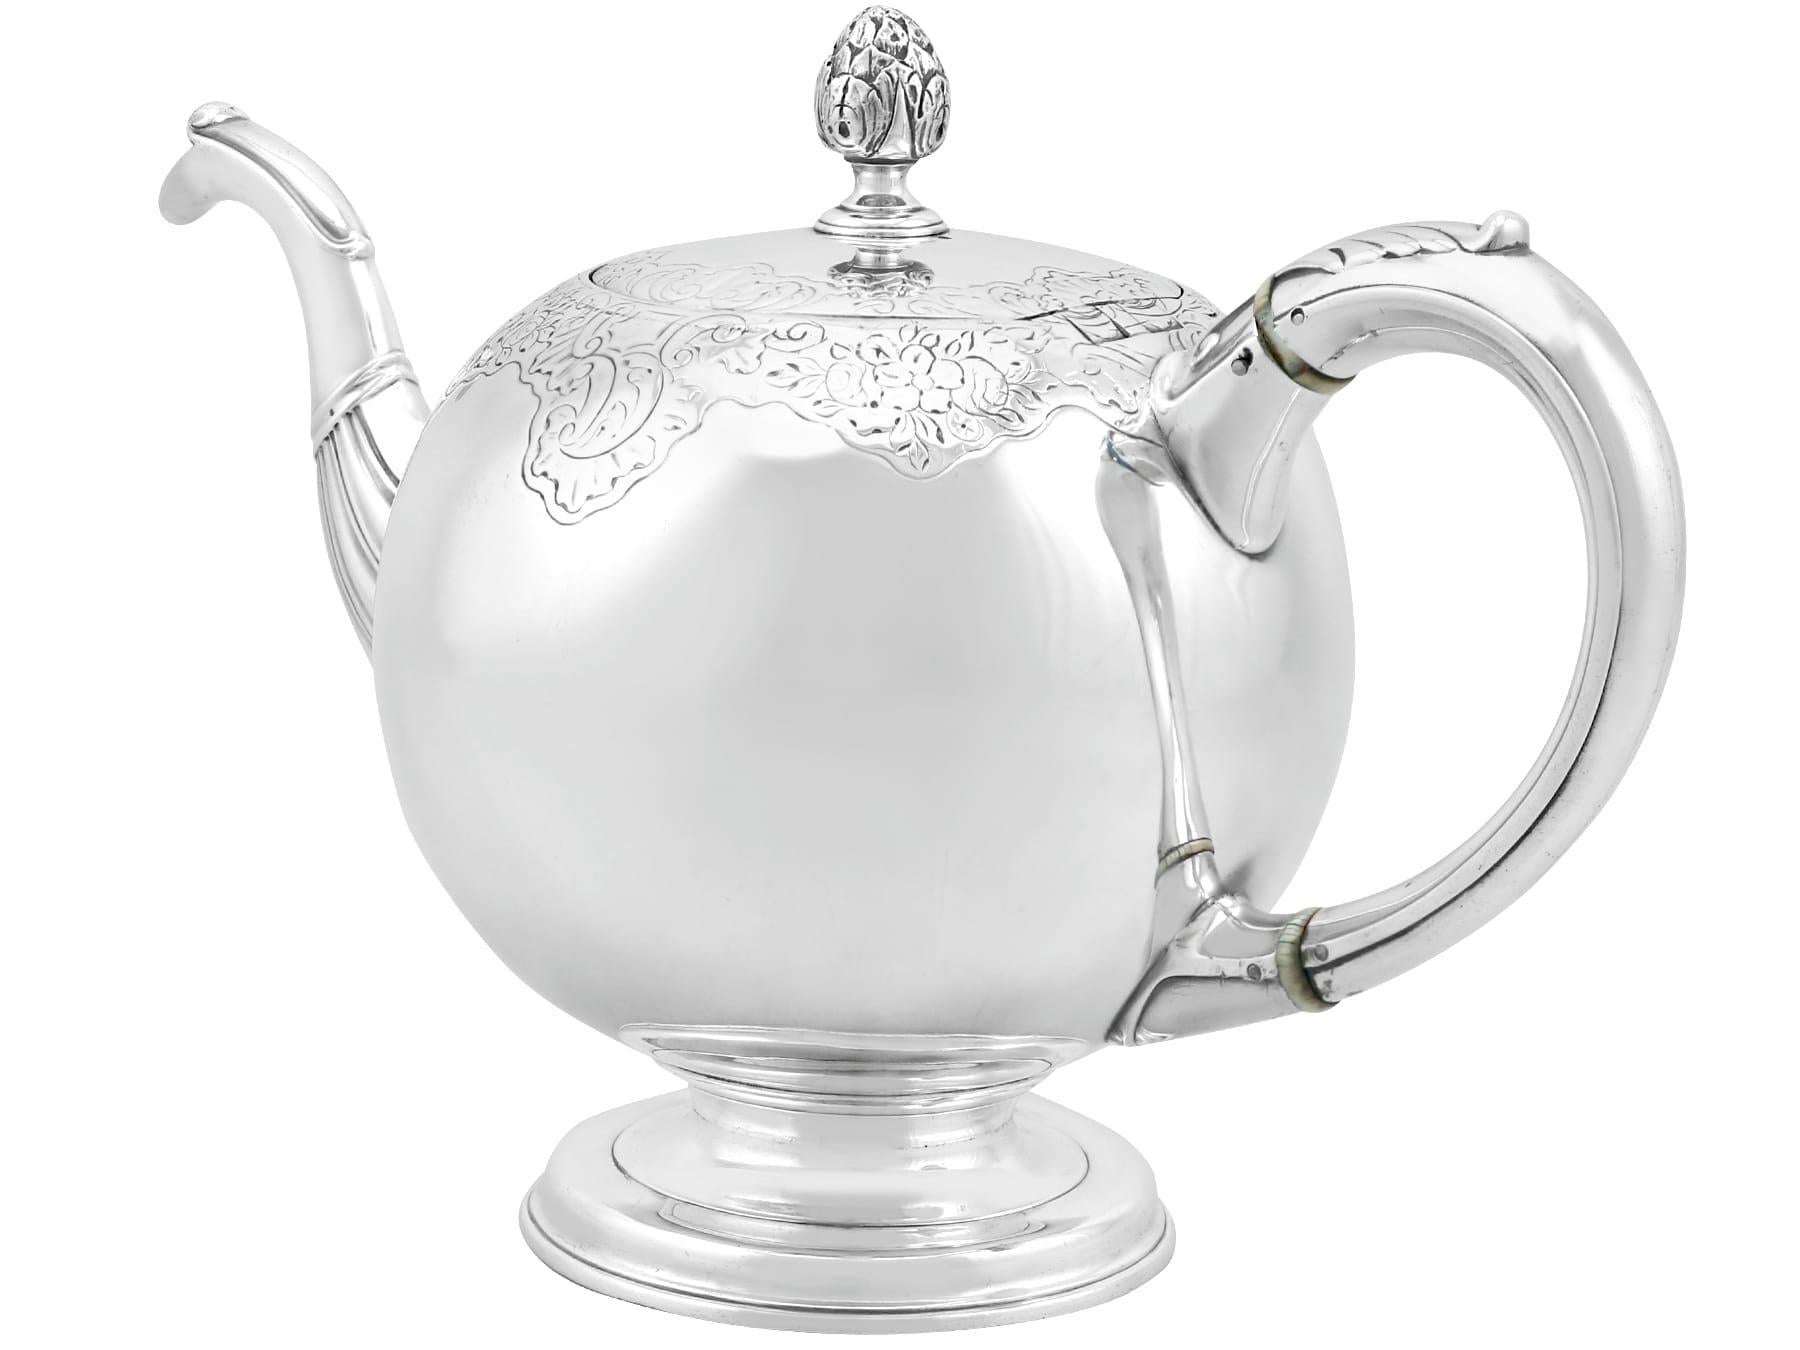 Antique Scottish Sterling Silver Teapot In Excellent Condition For Sale In Jesmond, Newcastle Upon Tyne